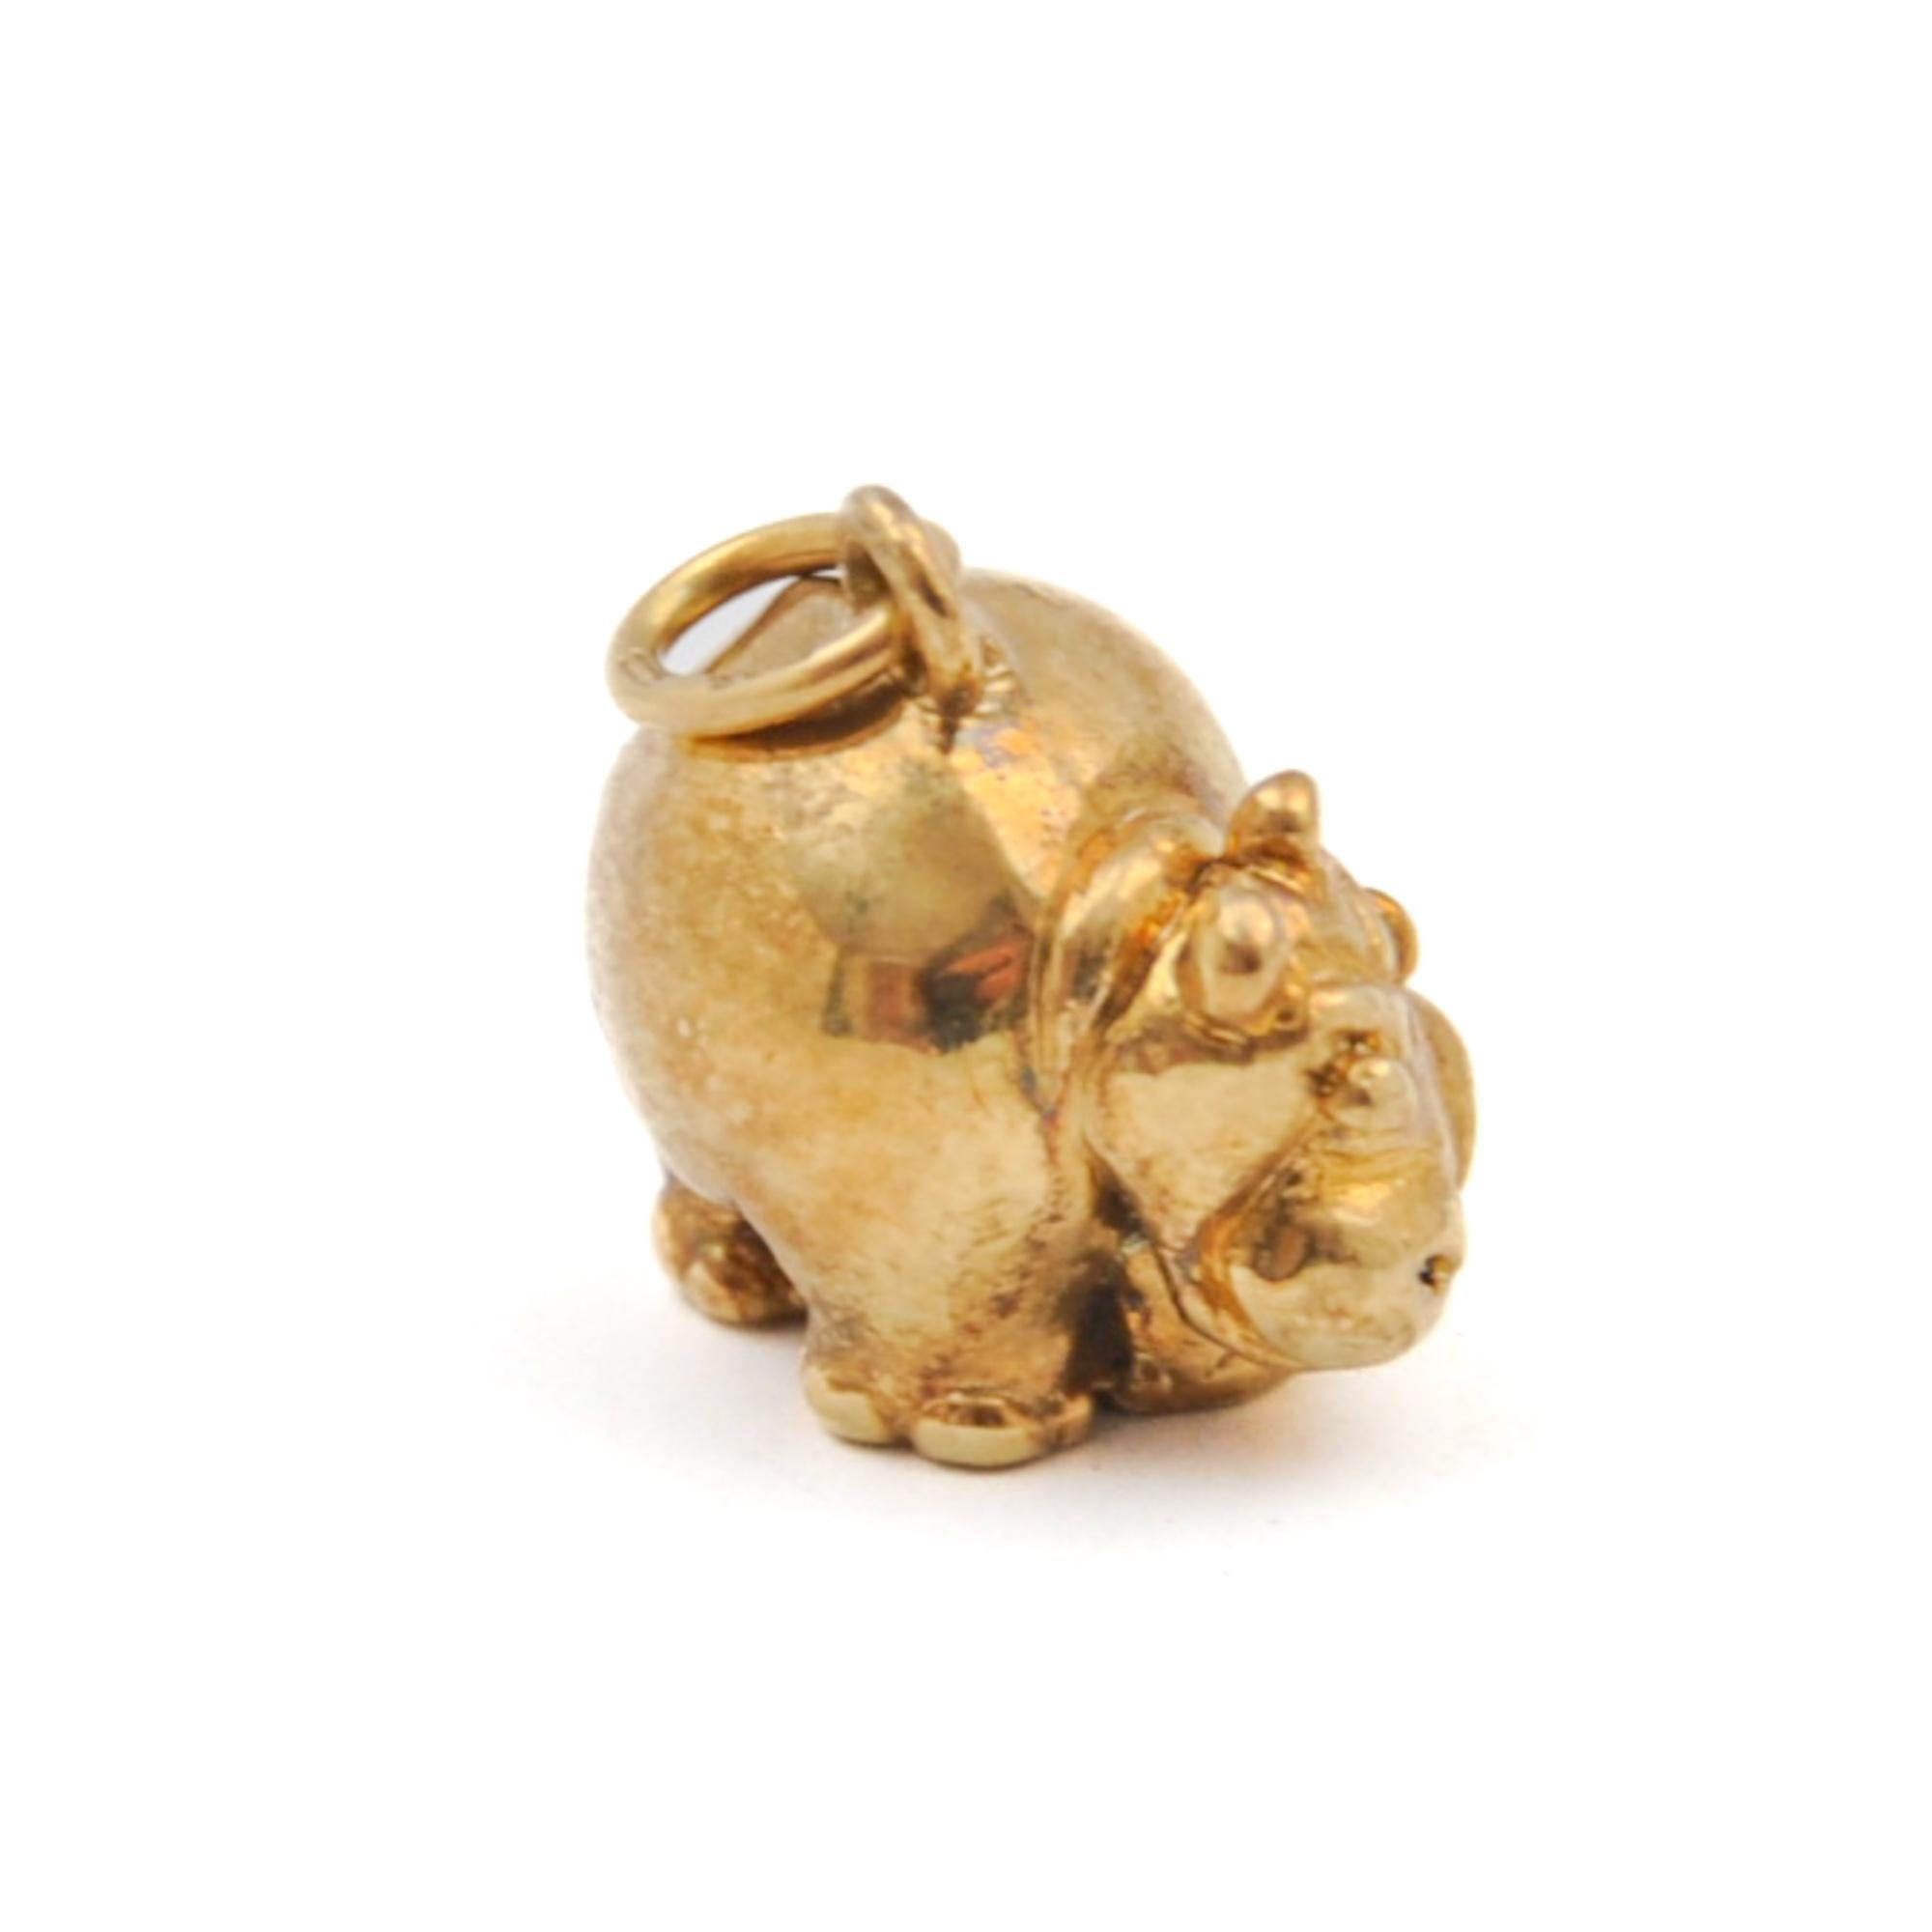 A rare vintage stylized and detailed hippo charm pendant. This animal has a real authentic hippo expression with its detailed head and firm body. This fearless creature is made in 14 karat gold.

The hippo is in very good condition and of high